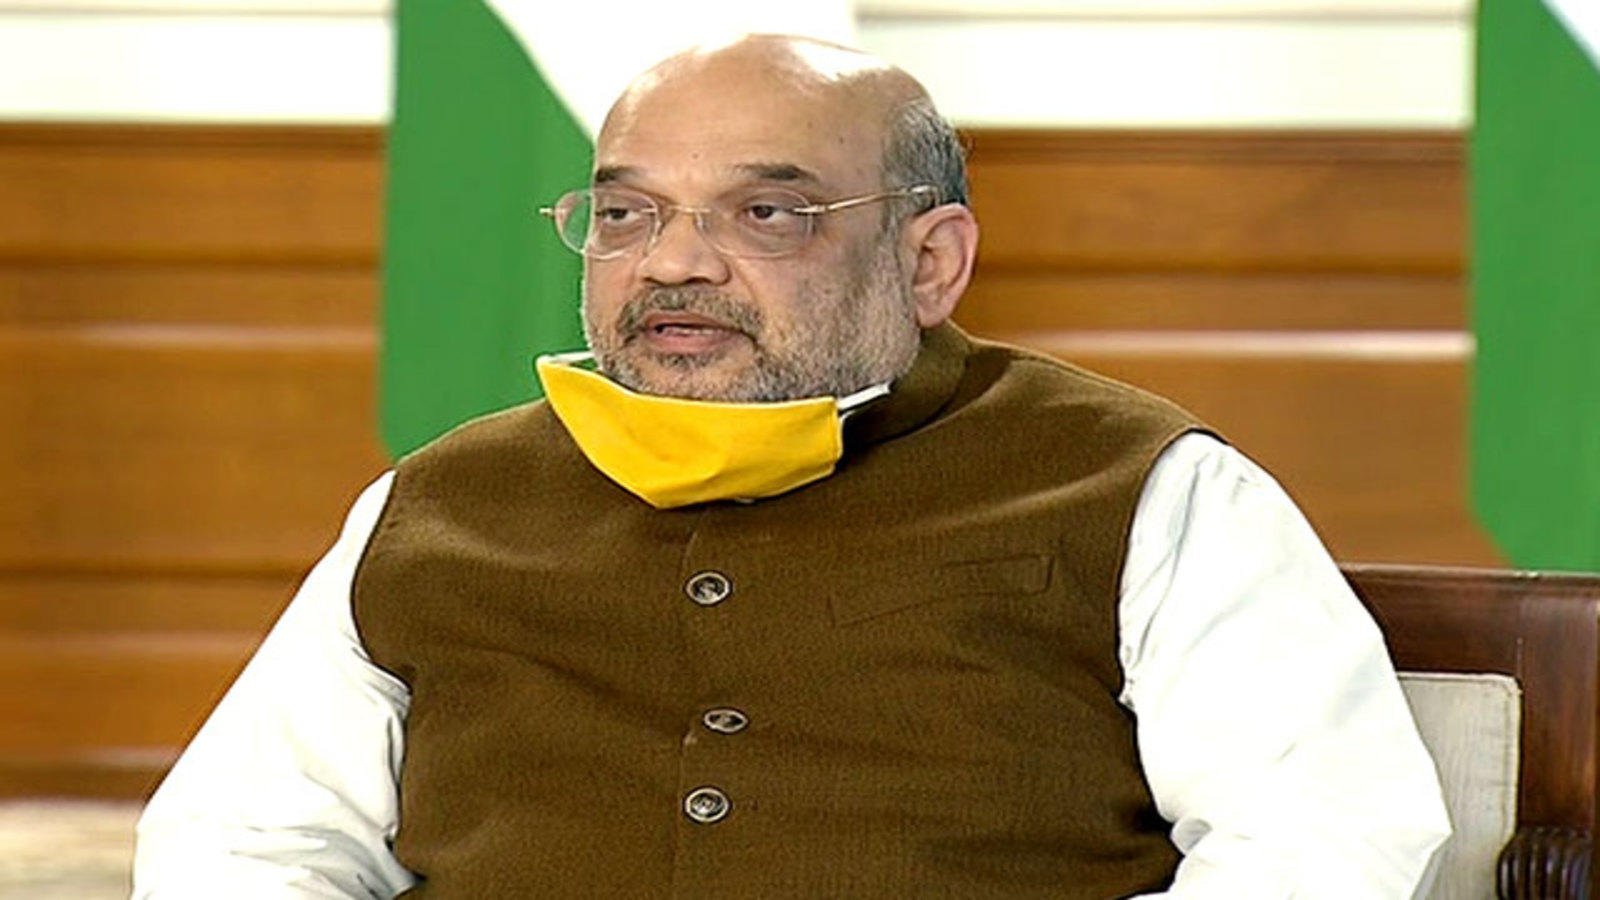 Structural reform measures will surely boost India’s economy, further efforts towards Aatmanirbhar Bharat: Amit Shah